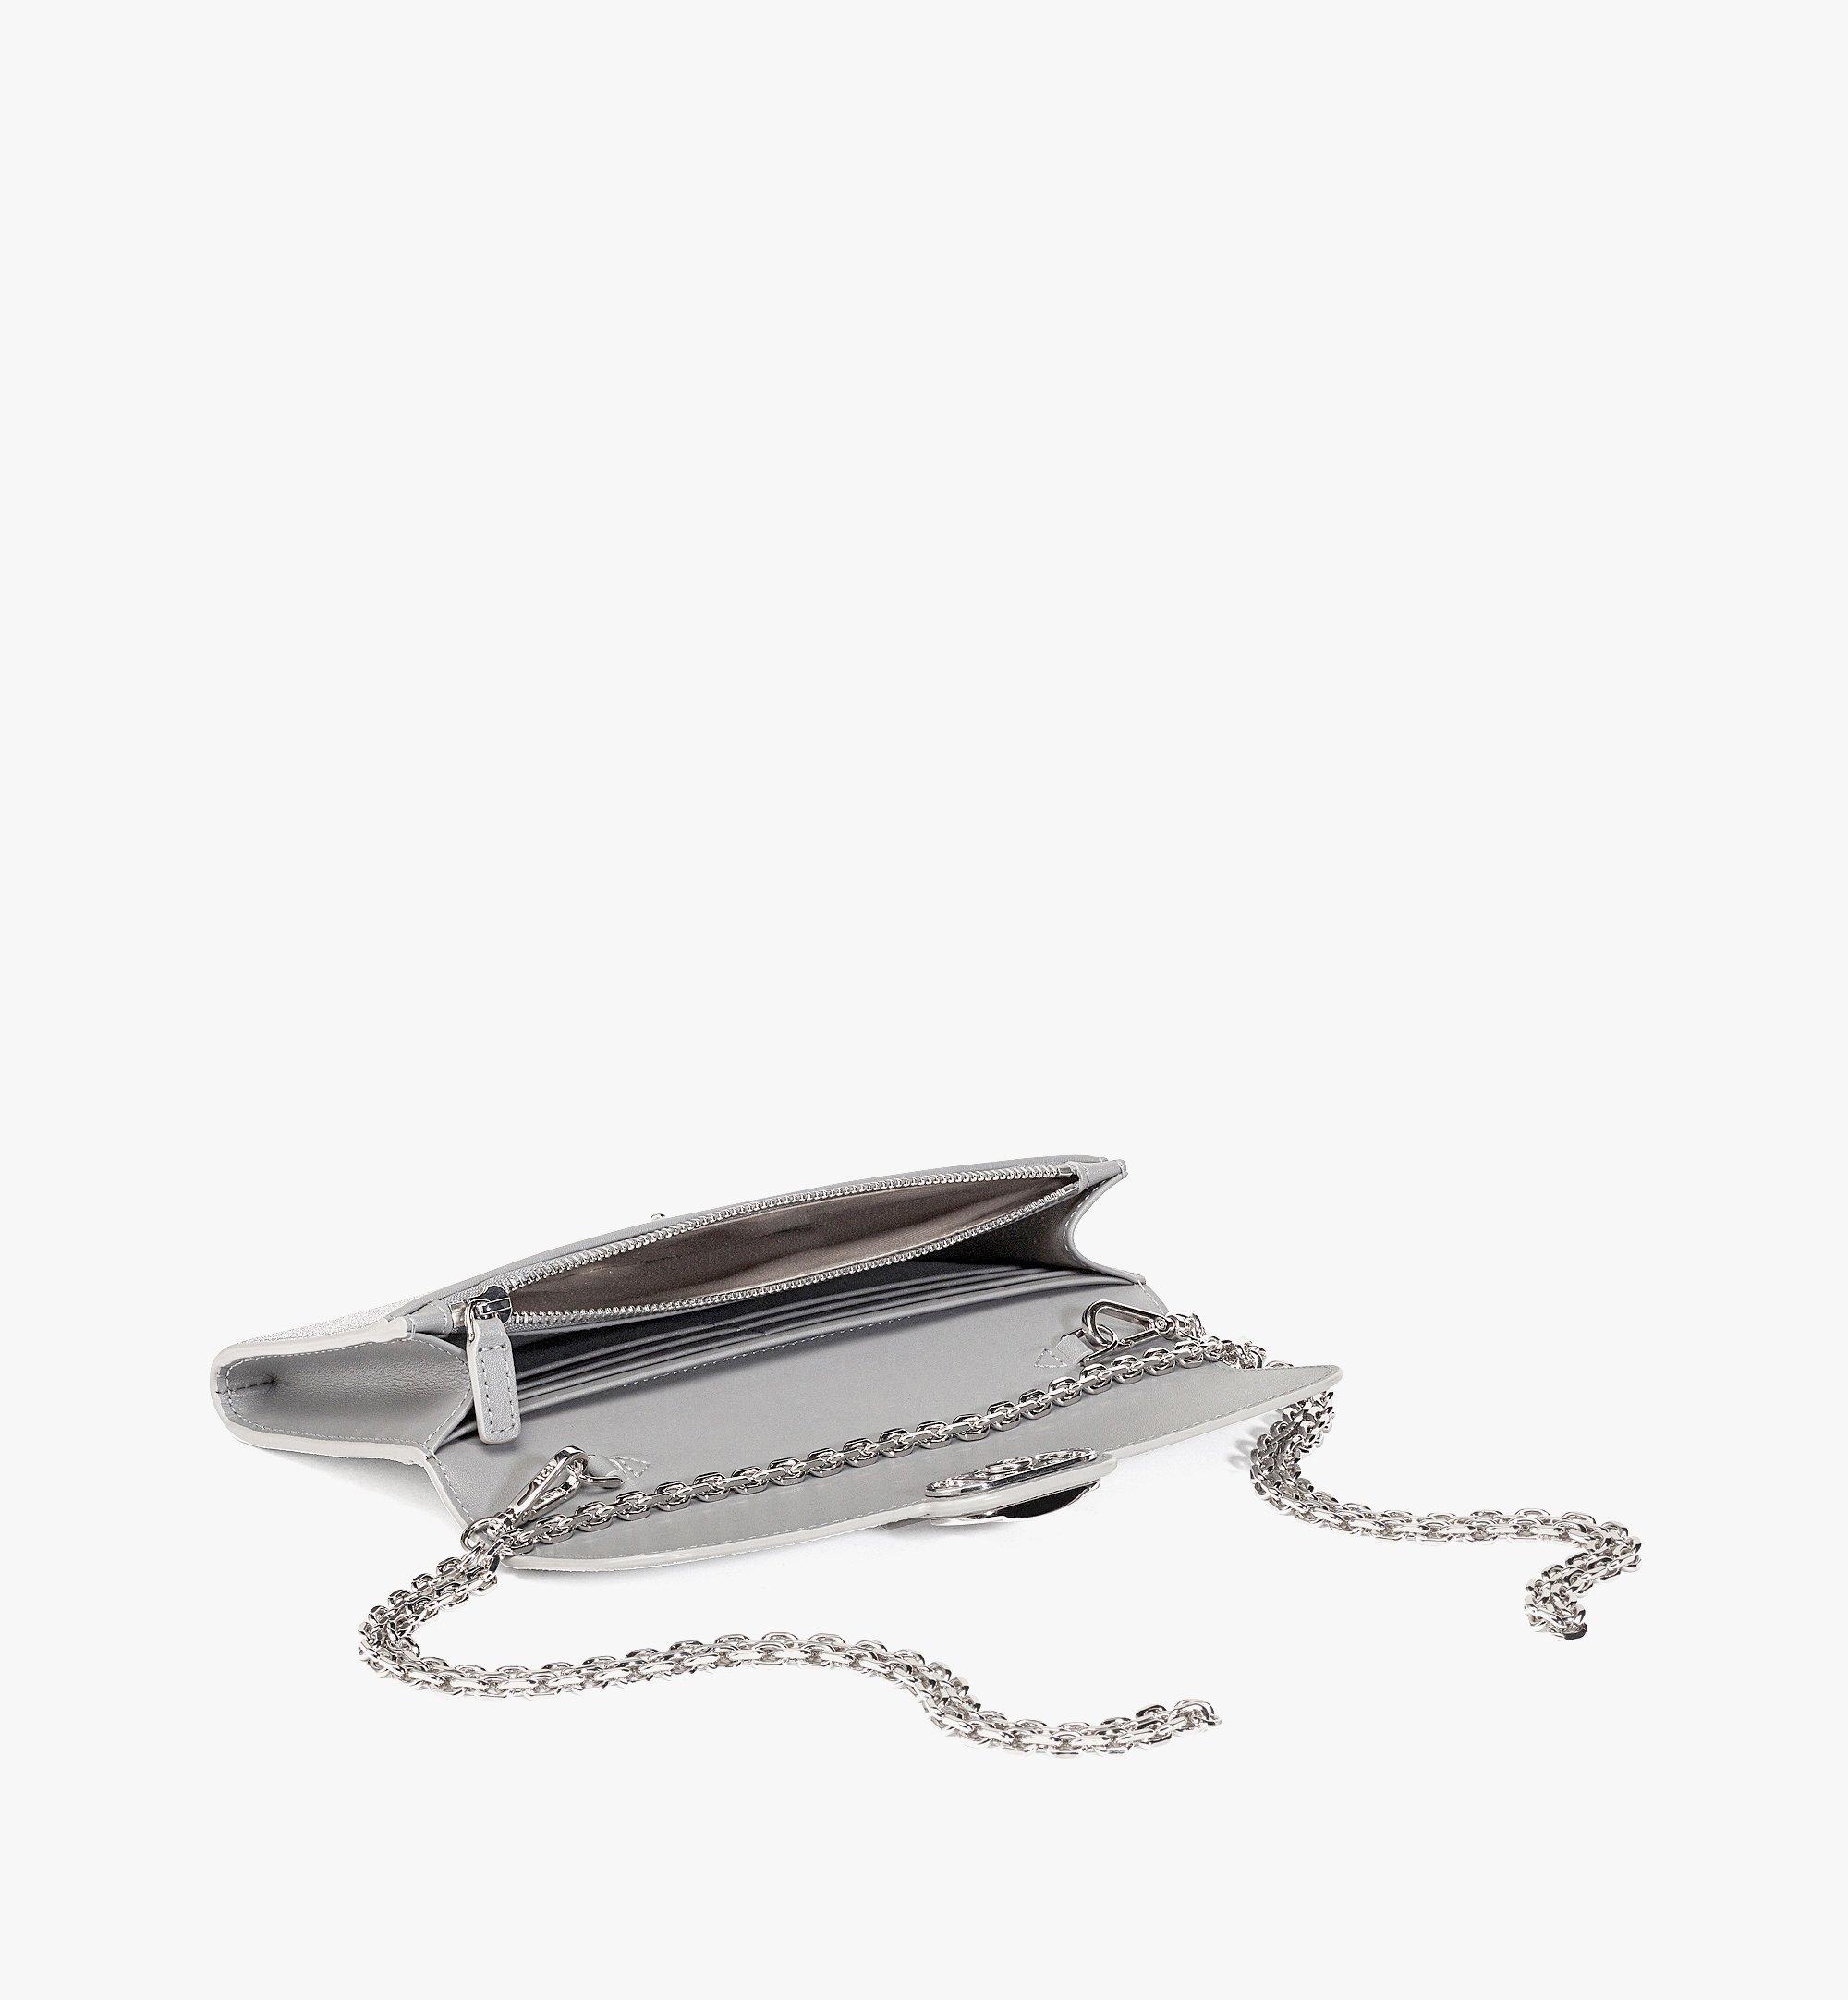 MCM Mode Travia Wallet on Chain in Glitter Leather Silver MYLDALD01SV001 Alternate View 1